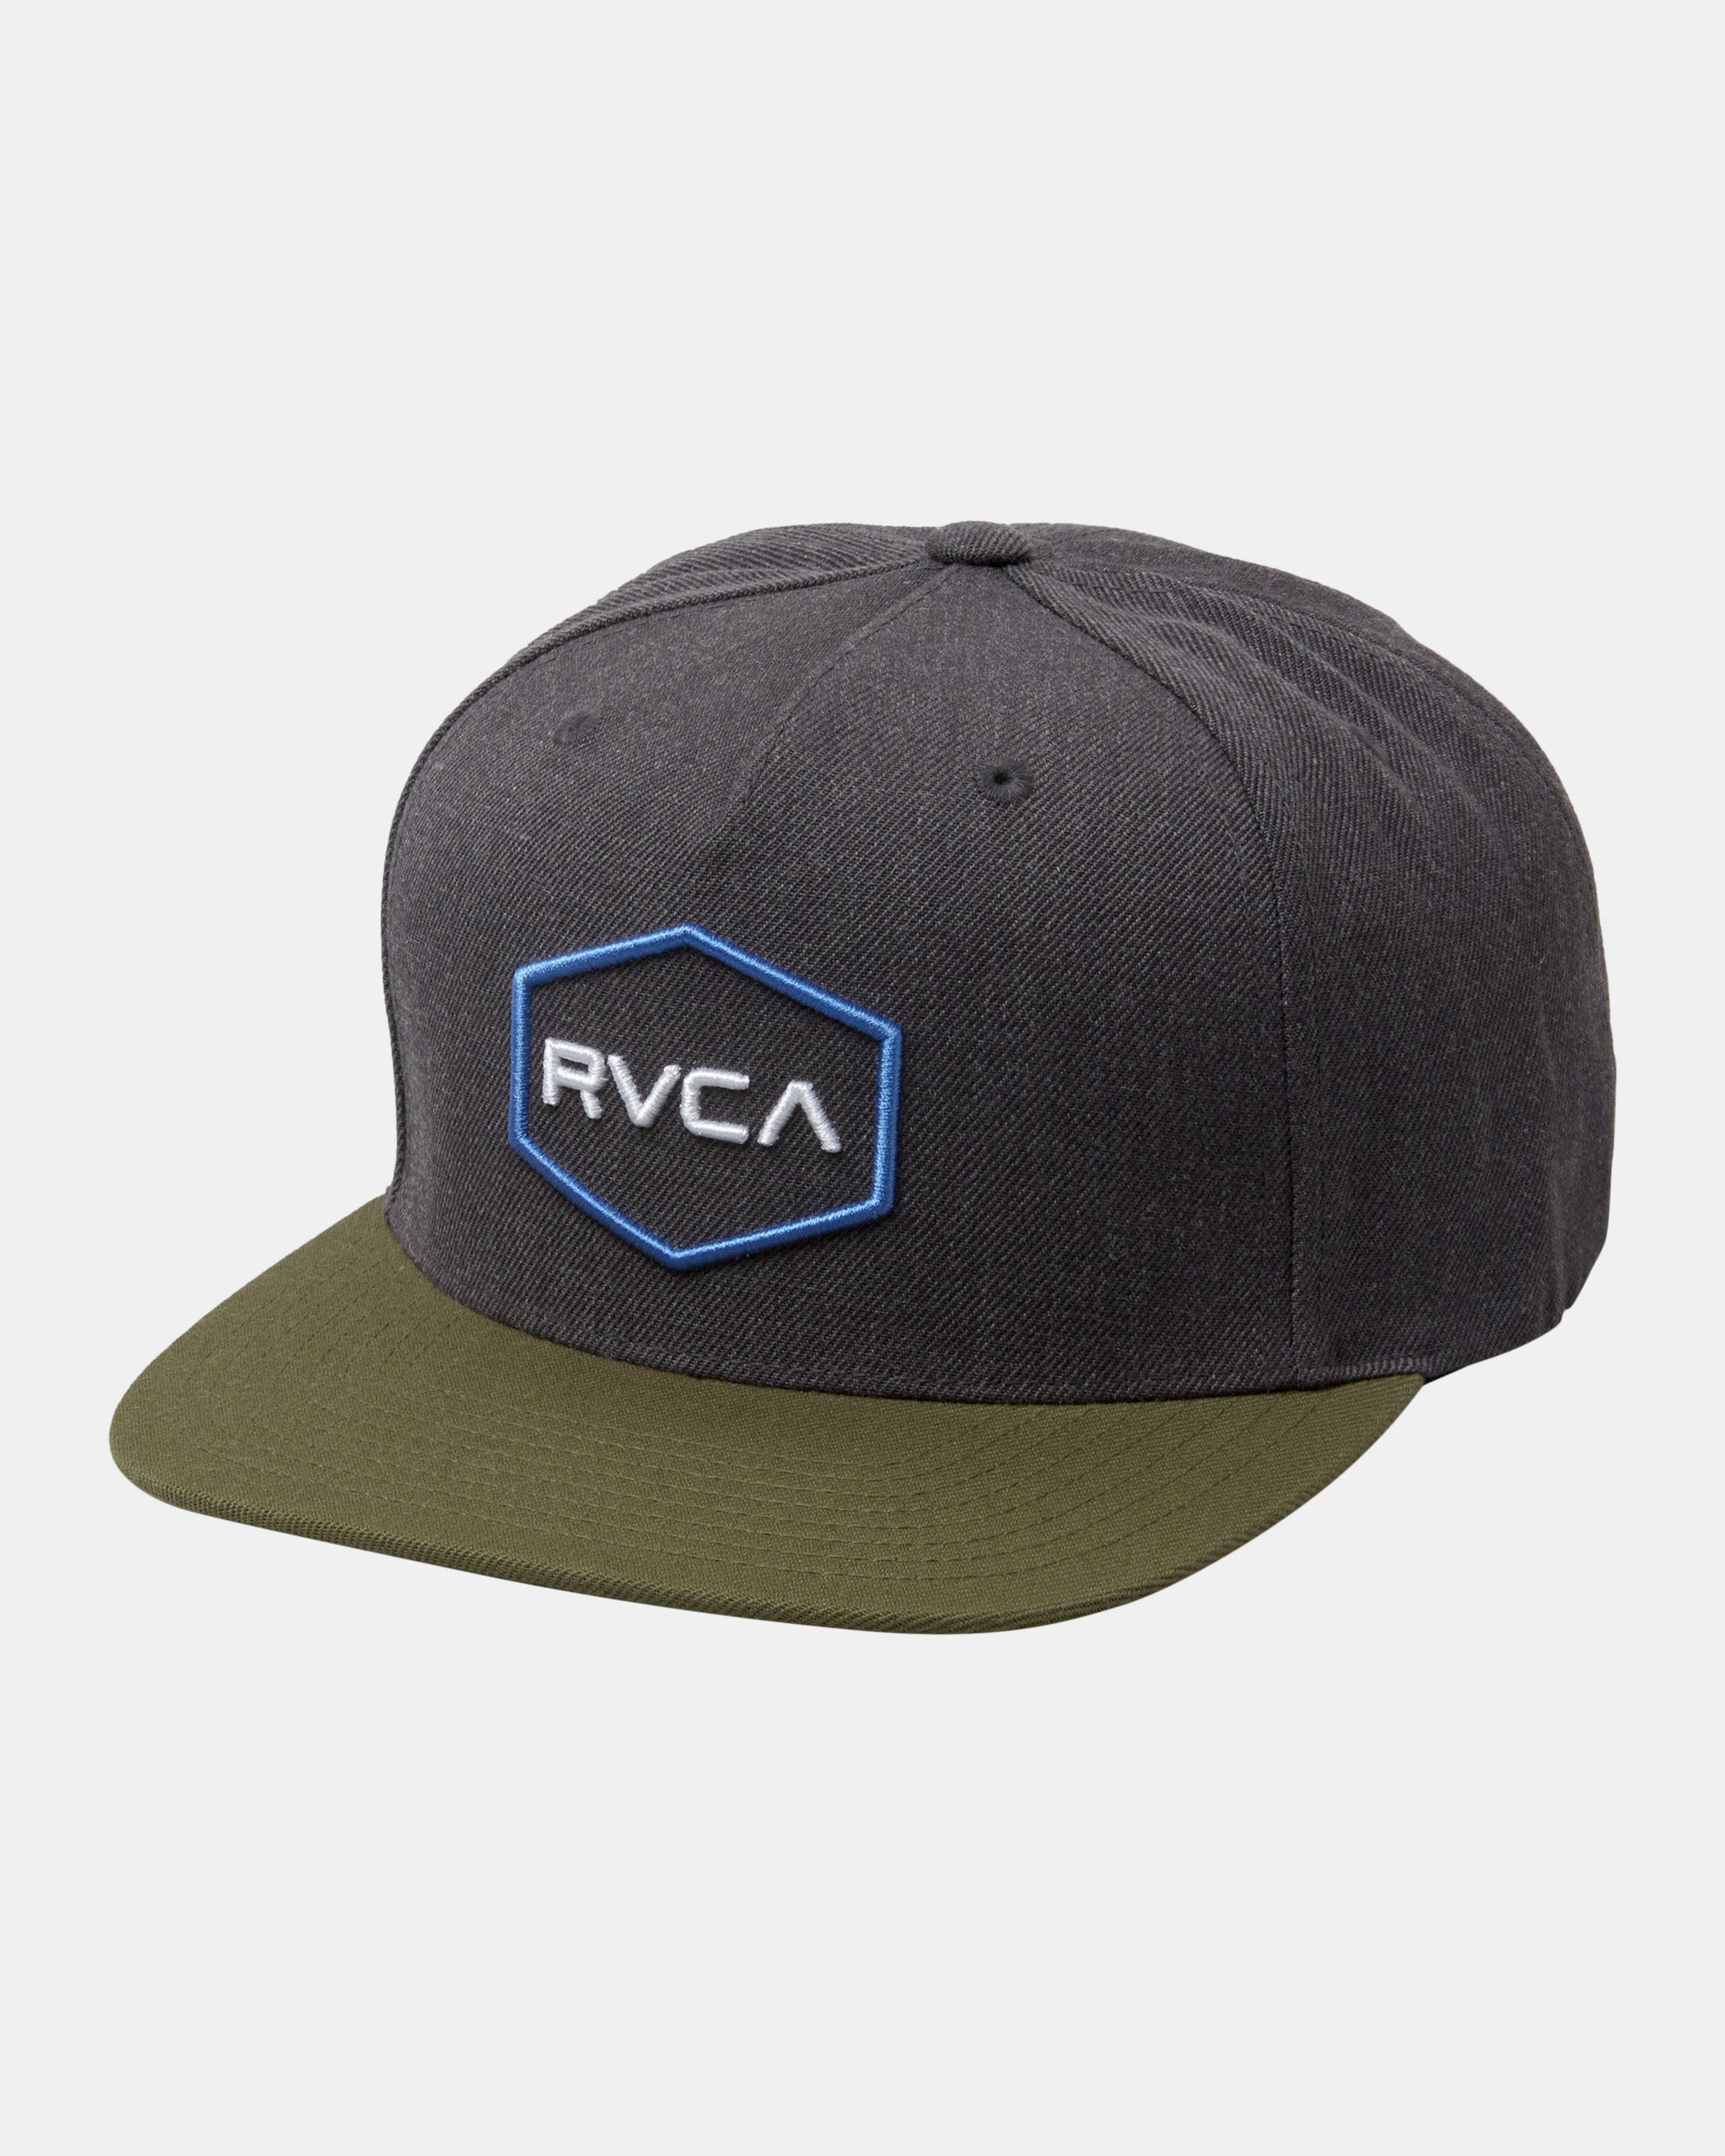 Commonwealth Snapback Hat - Charcoal/Olive